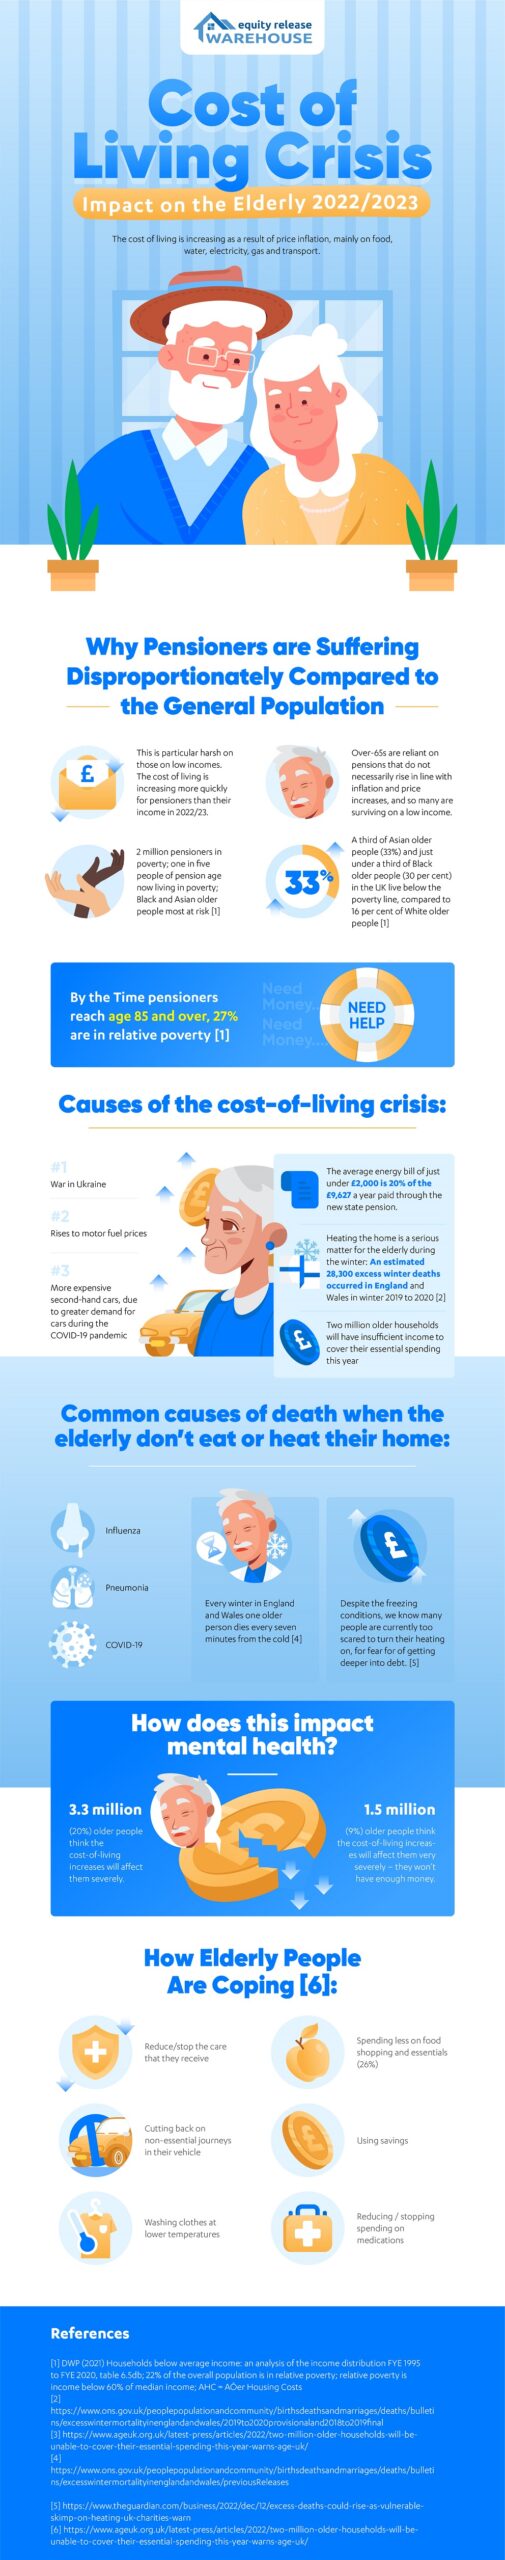 an infographic showing how the elderly are affected by the cost of living crisis.